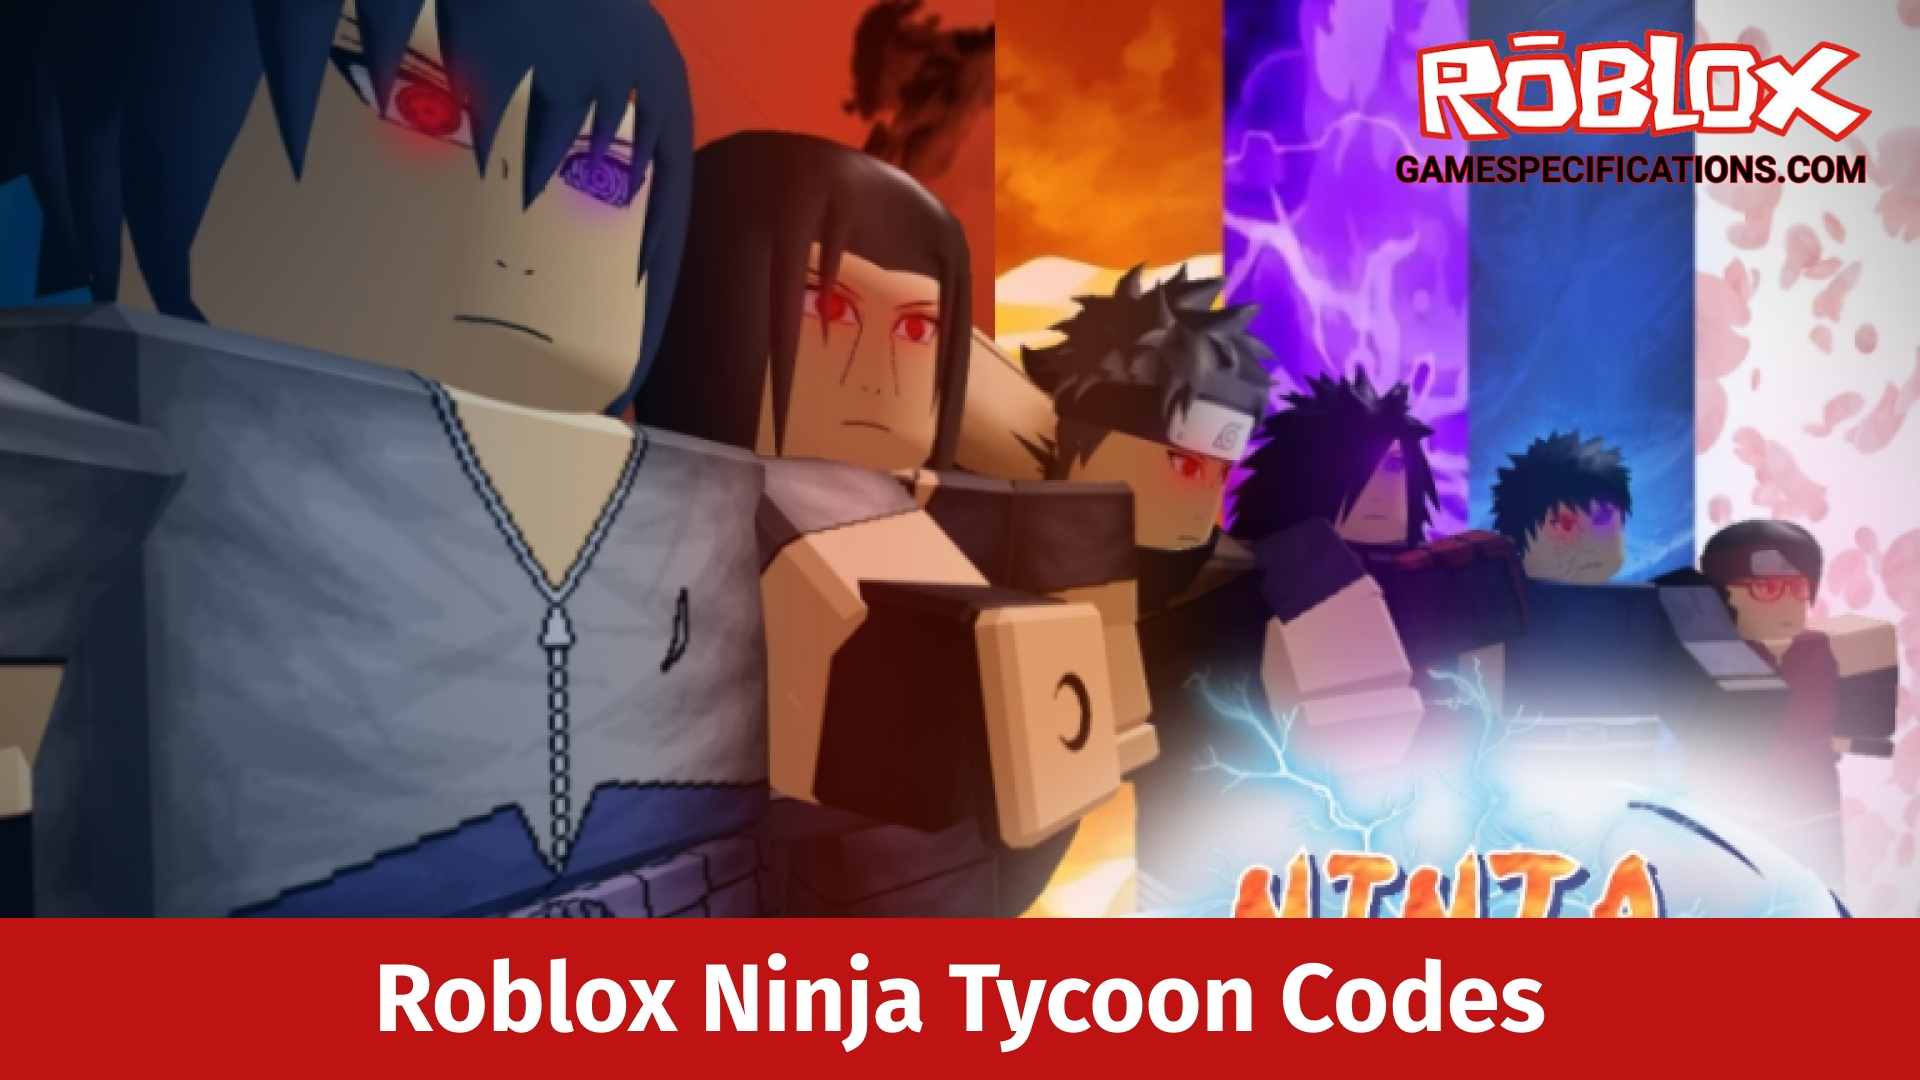 Roblox Ninja Tycoon Codes July 2021 Game Specifications - 2 player tycoon roblox codes